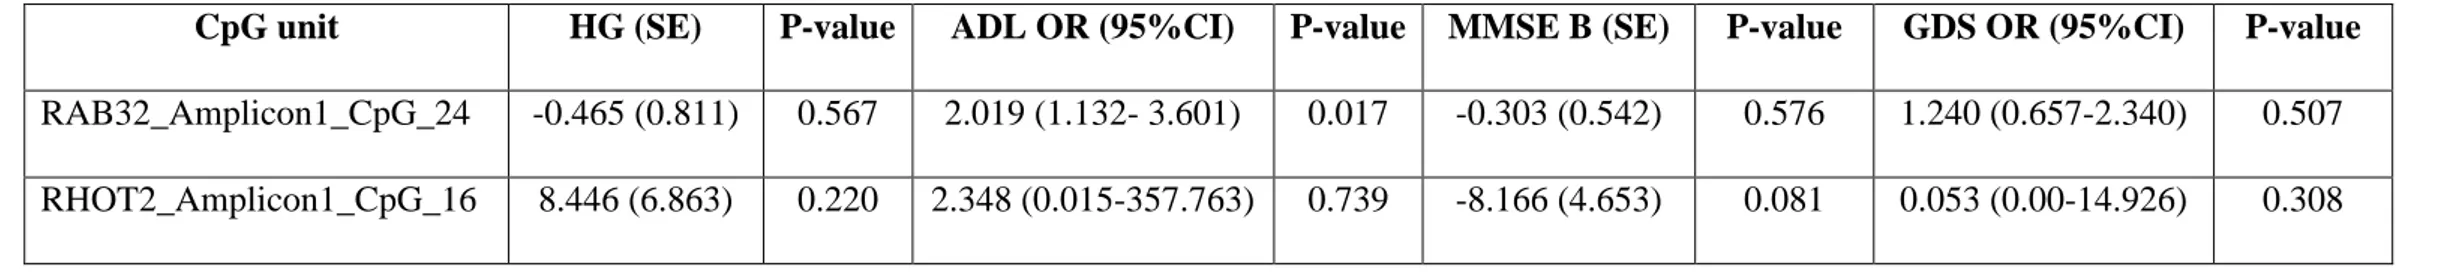 Table 3. Association between the methylation levels of RAB32 and RHOT2 CpG units and physical and cognitive abilities 